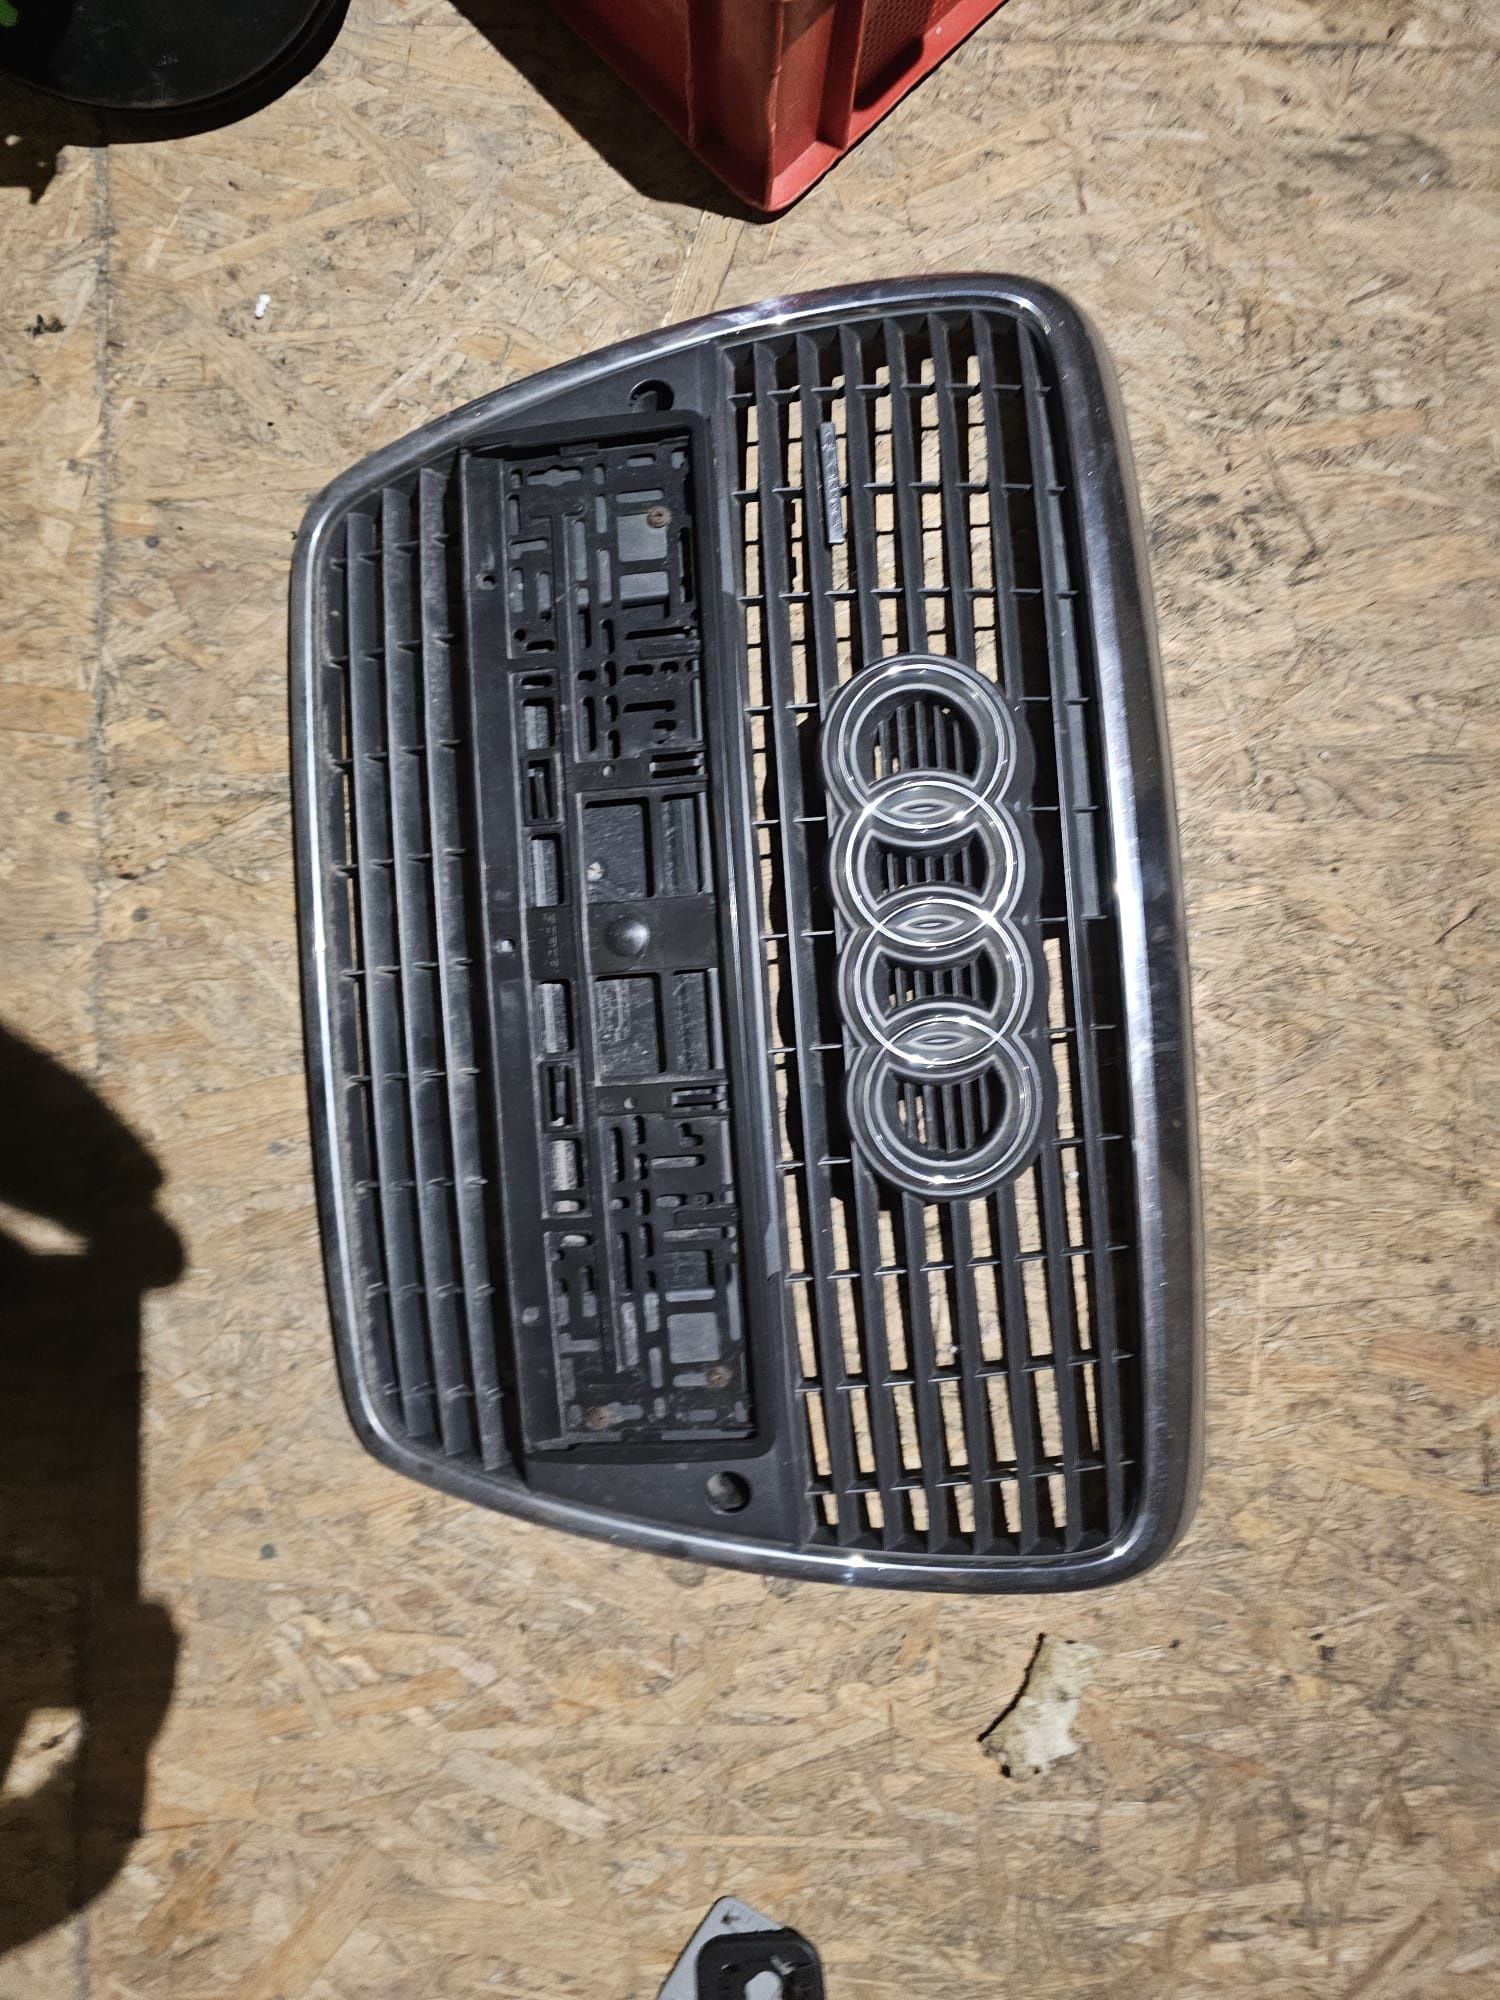 Grill audi a6 c6 pdc